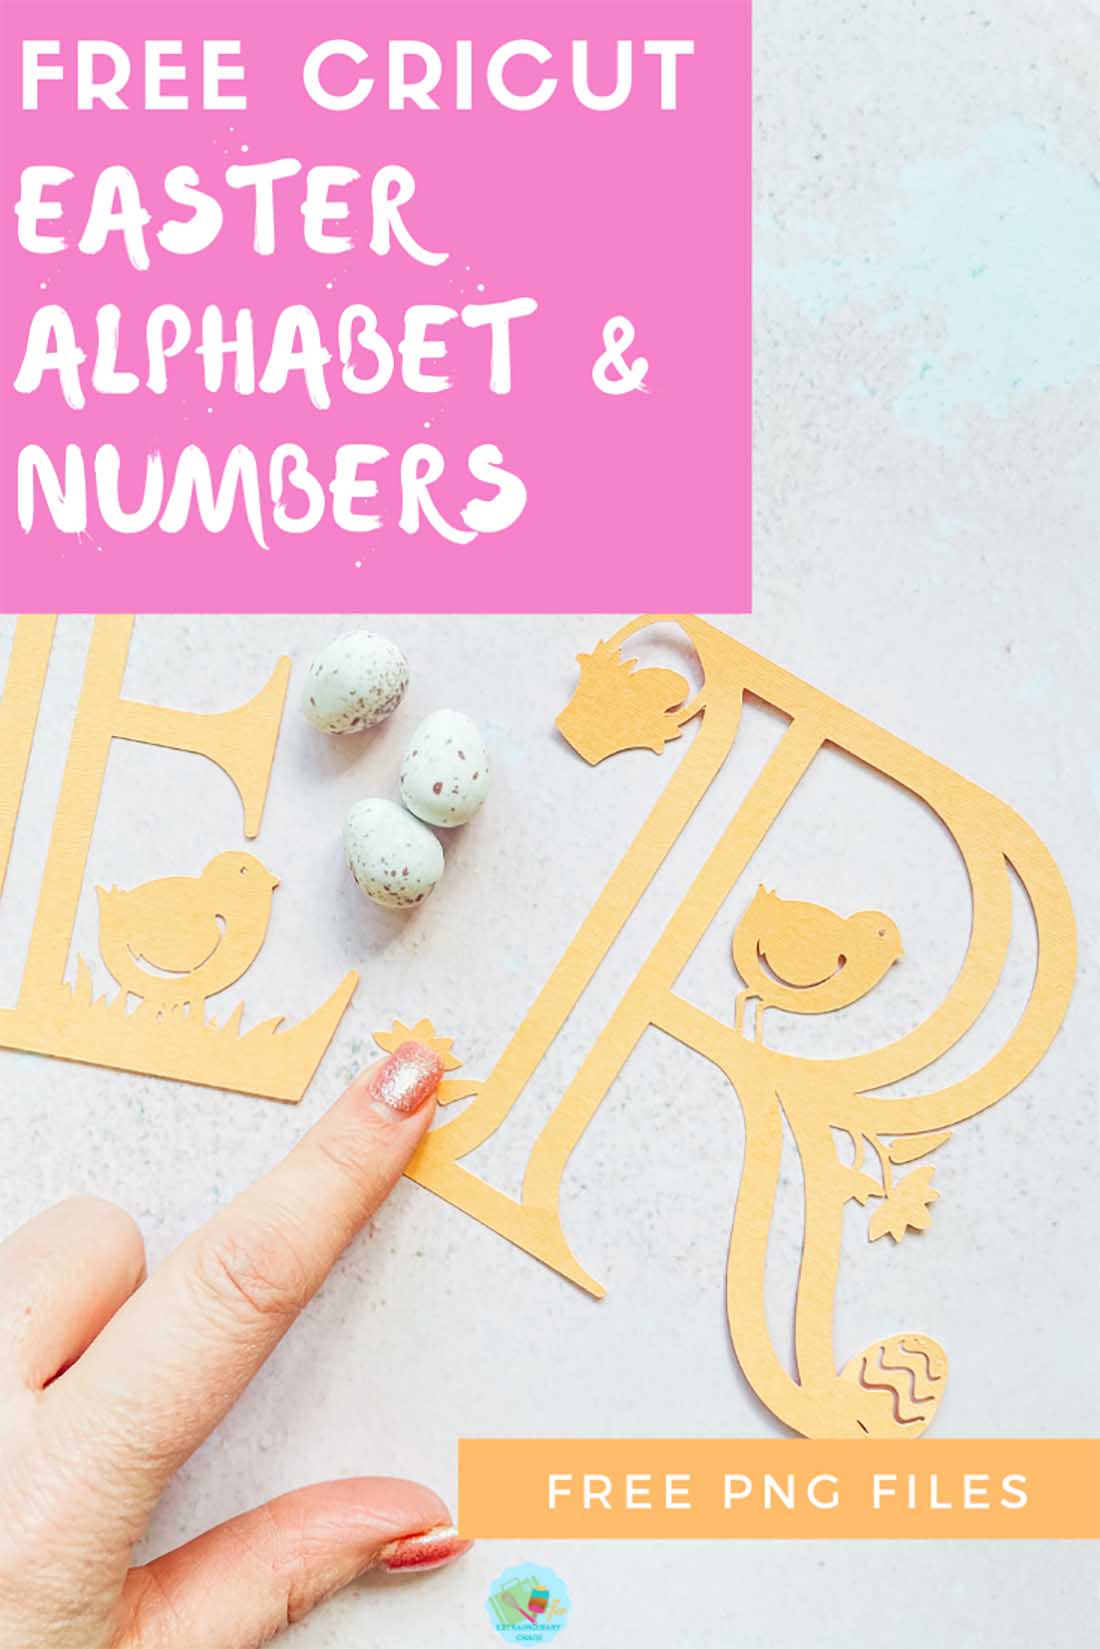 Free Cricut Easter Alphabet and Number Set for using with paper and vinyl